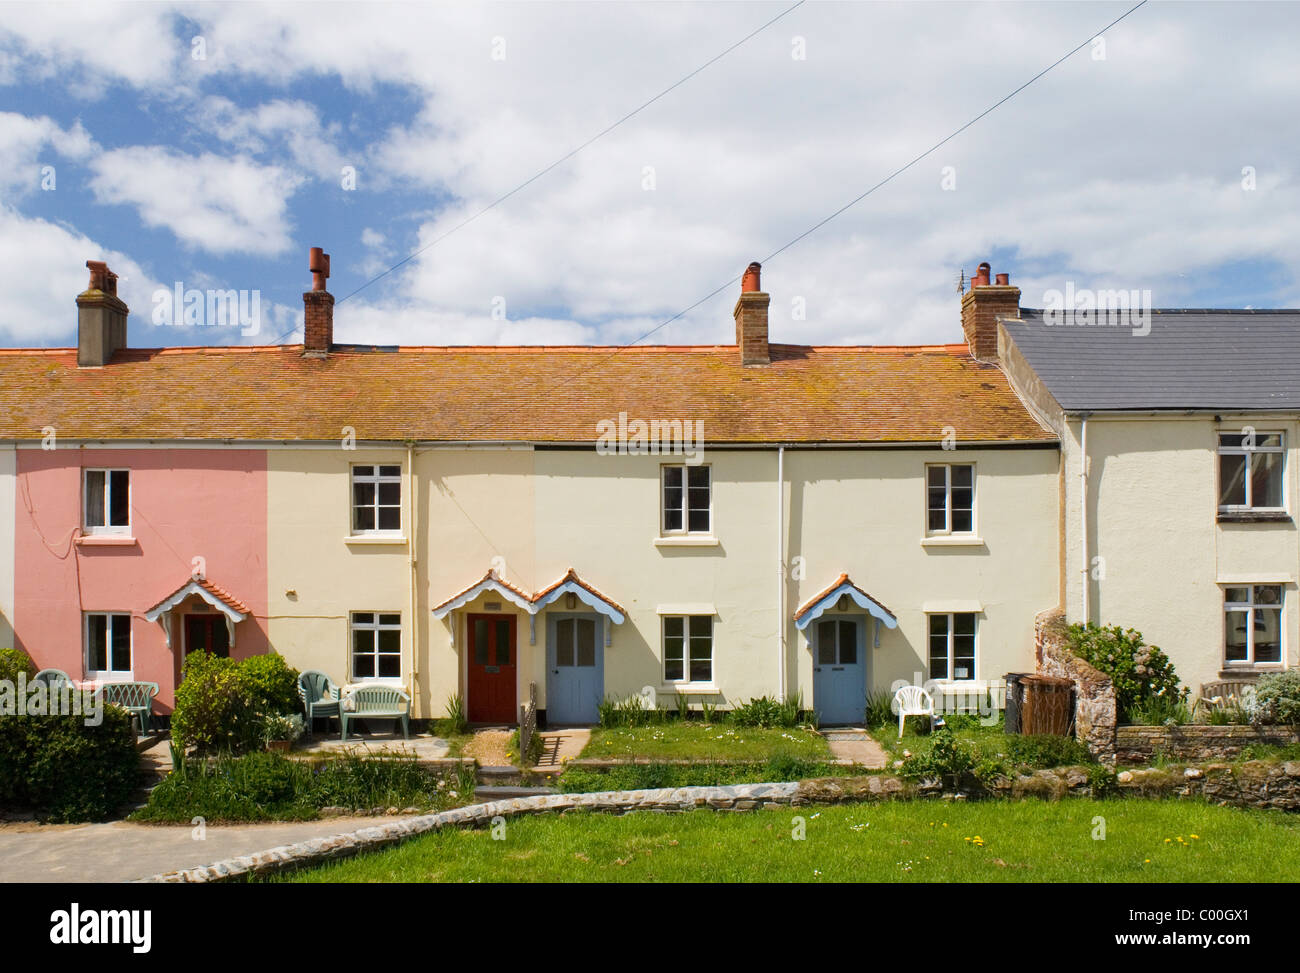 Colourful Holiday Cottages In Village At Hope Cove Stock Photo